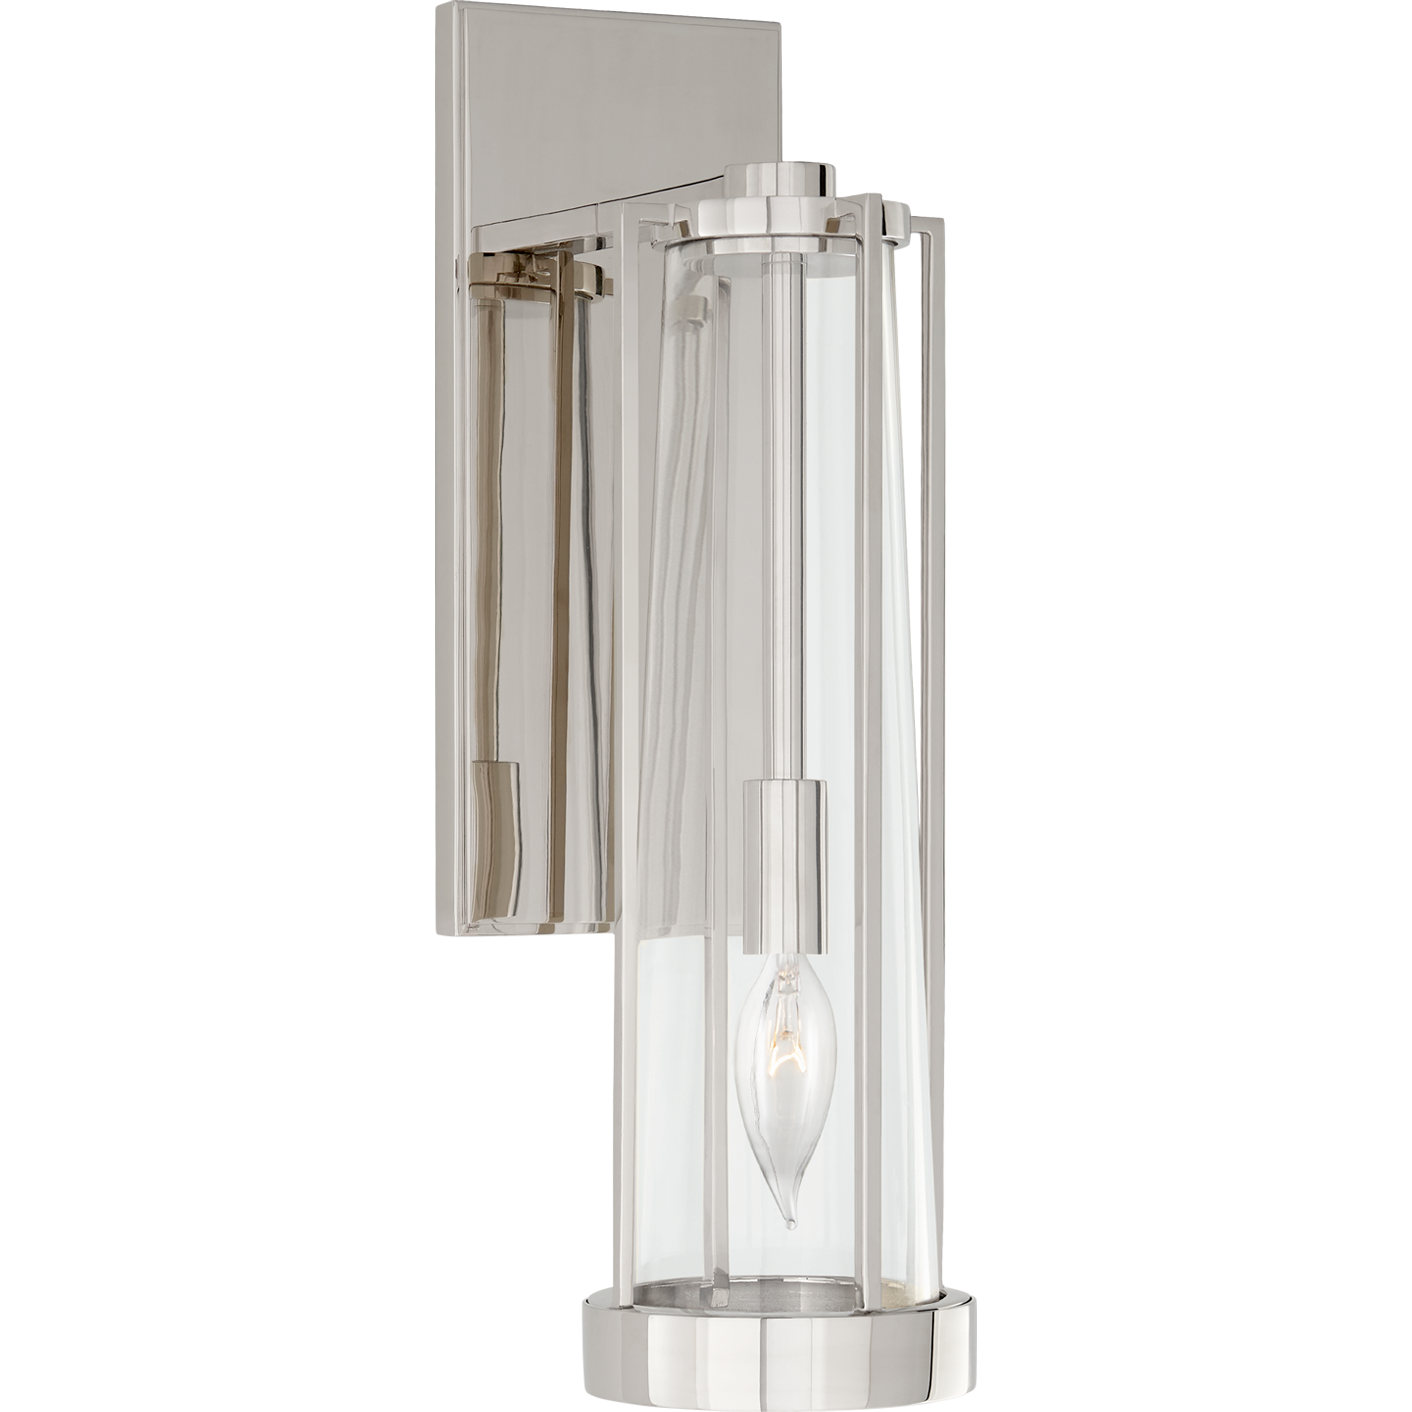 Calix Bracketed Sconce